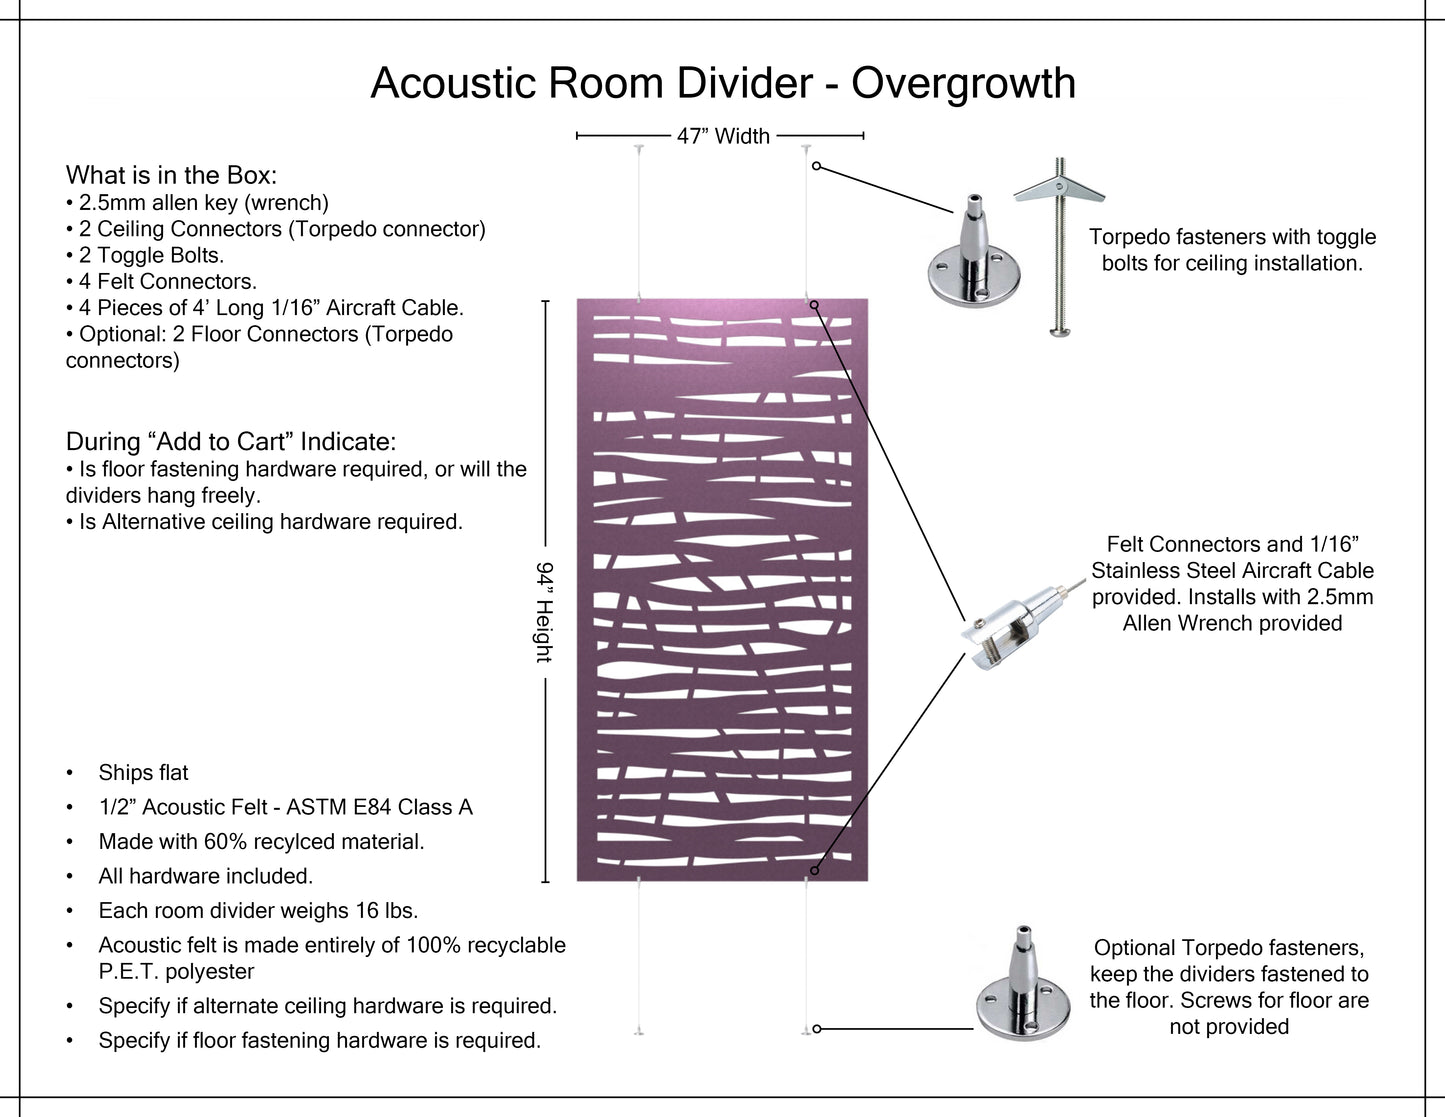 4x8 Acoustic Room Divider - Overgrowth